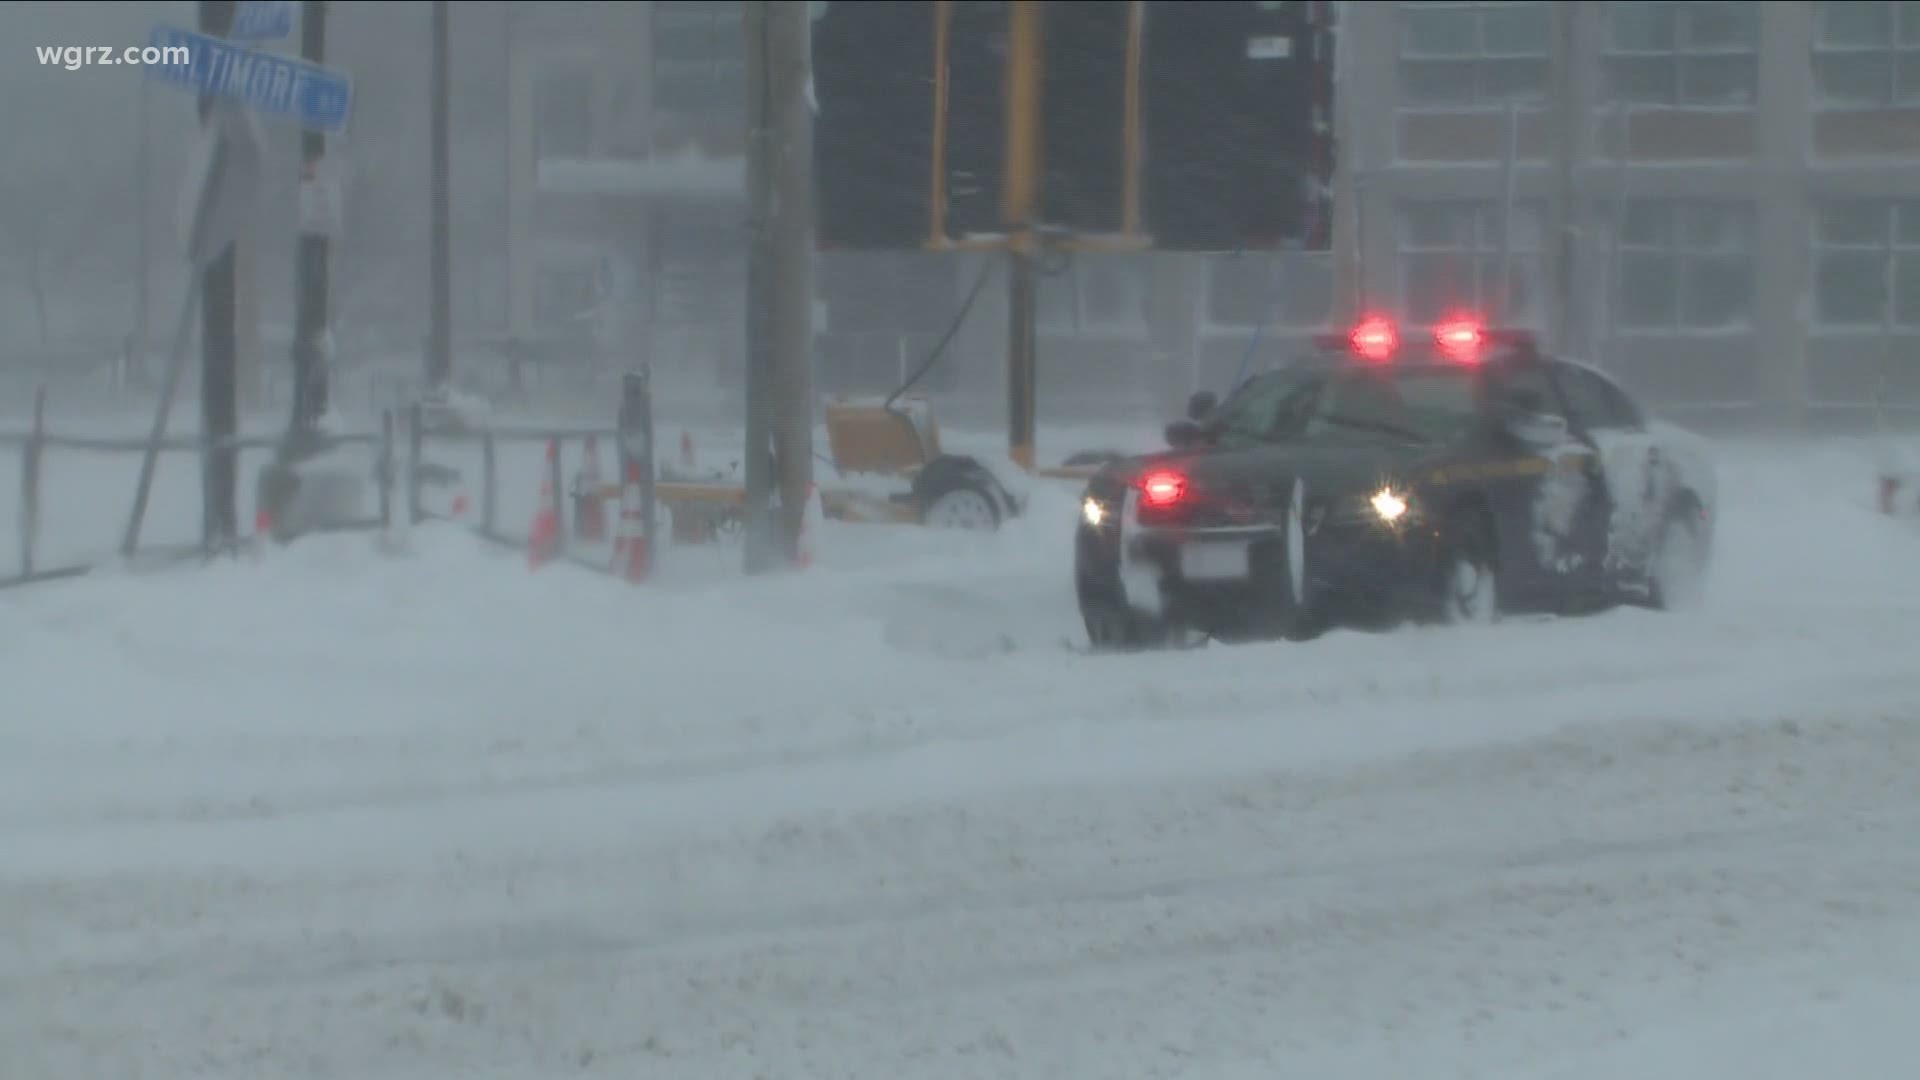 Snow causes closure of state covid testing site in Buffalo